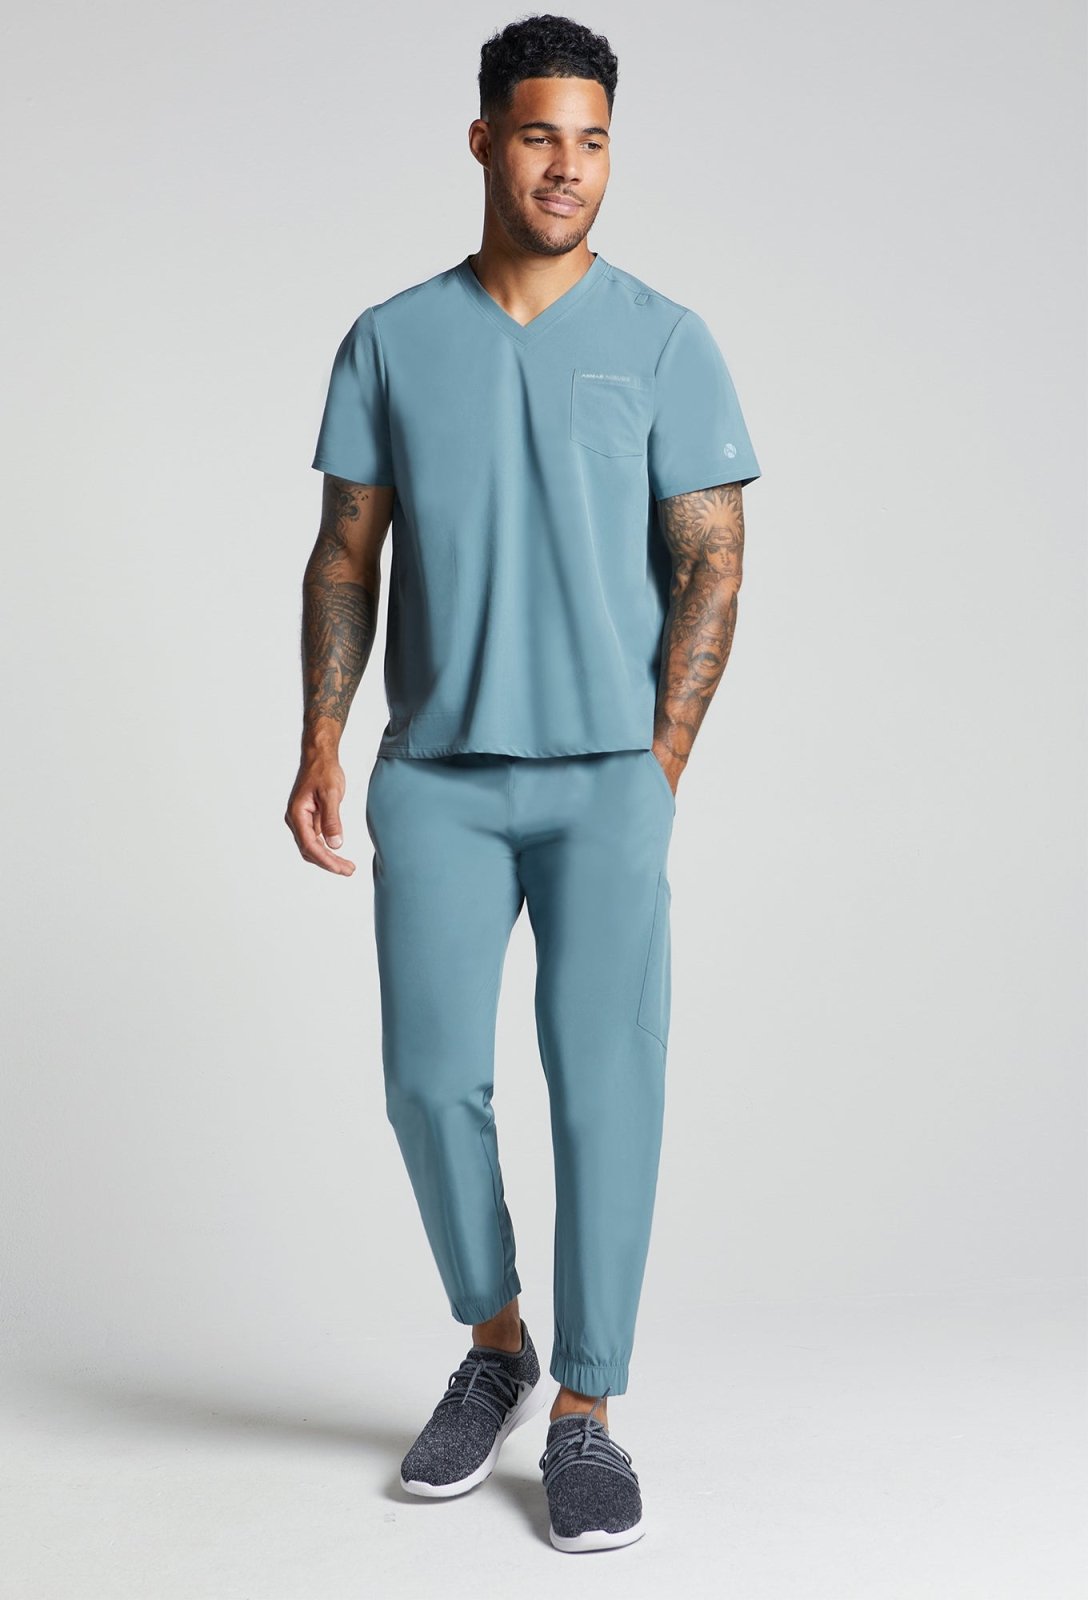 What Do Different Colored Scrubs Mean? – Noel Asmar Uniforms